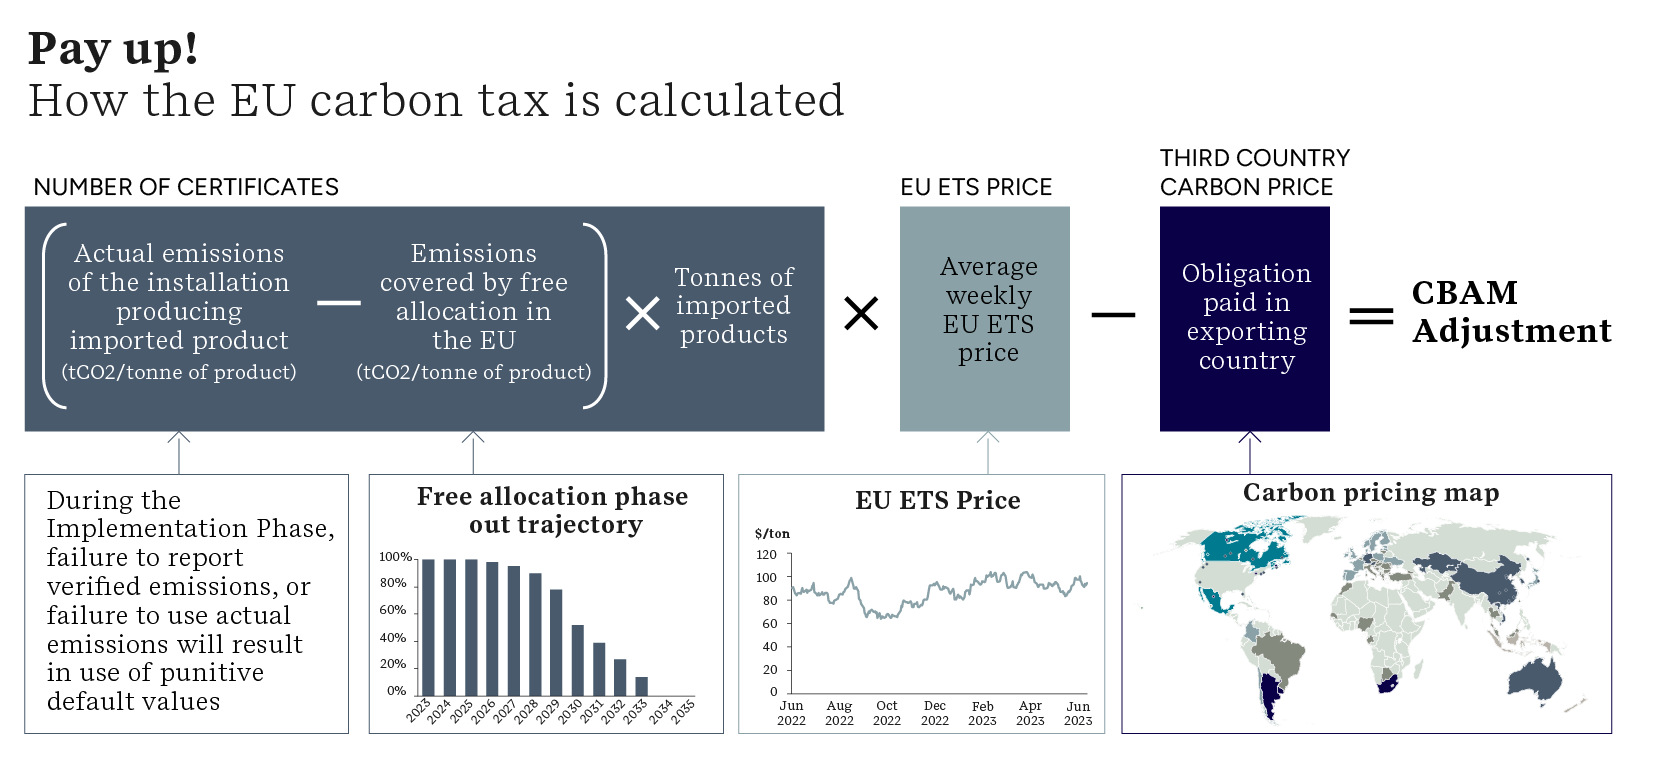 Pay up! How the EU carbon tax is calculated